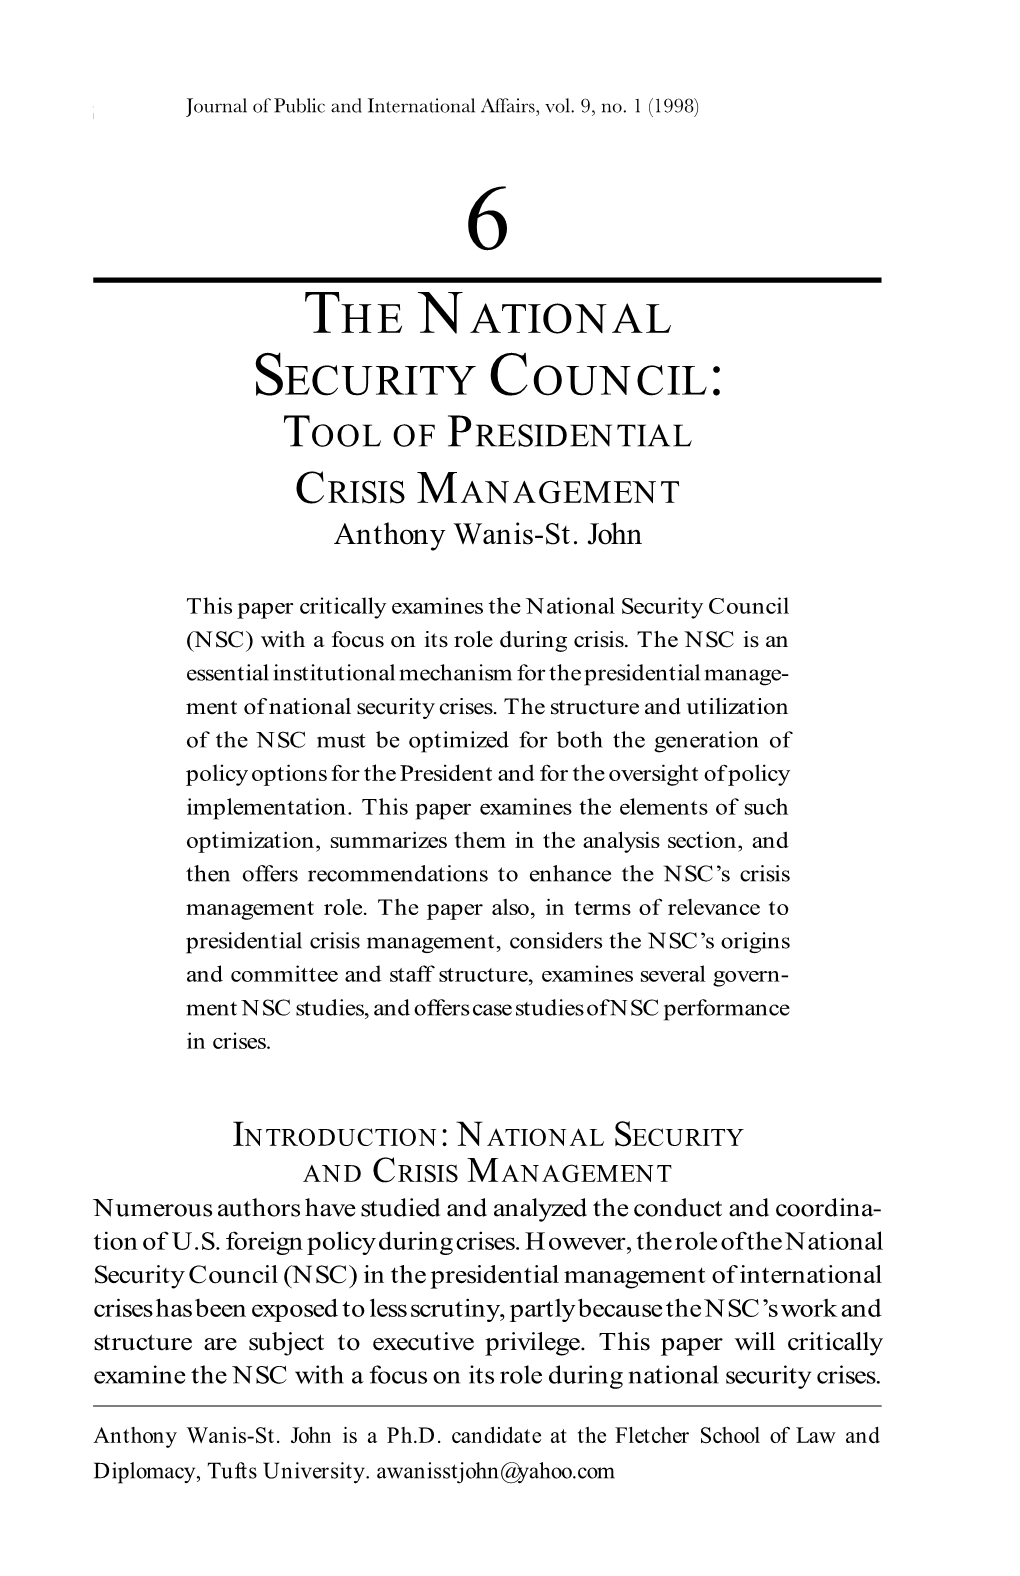 THE NATIONAL SECURITY COUNCIL: TOOL of PRESIDENTIAL CRISIS MANAGEMENT Anthony Wanis-St